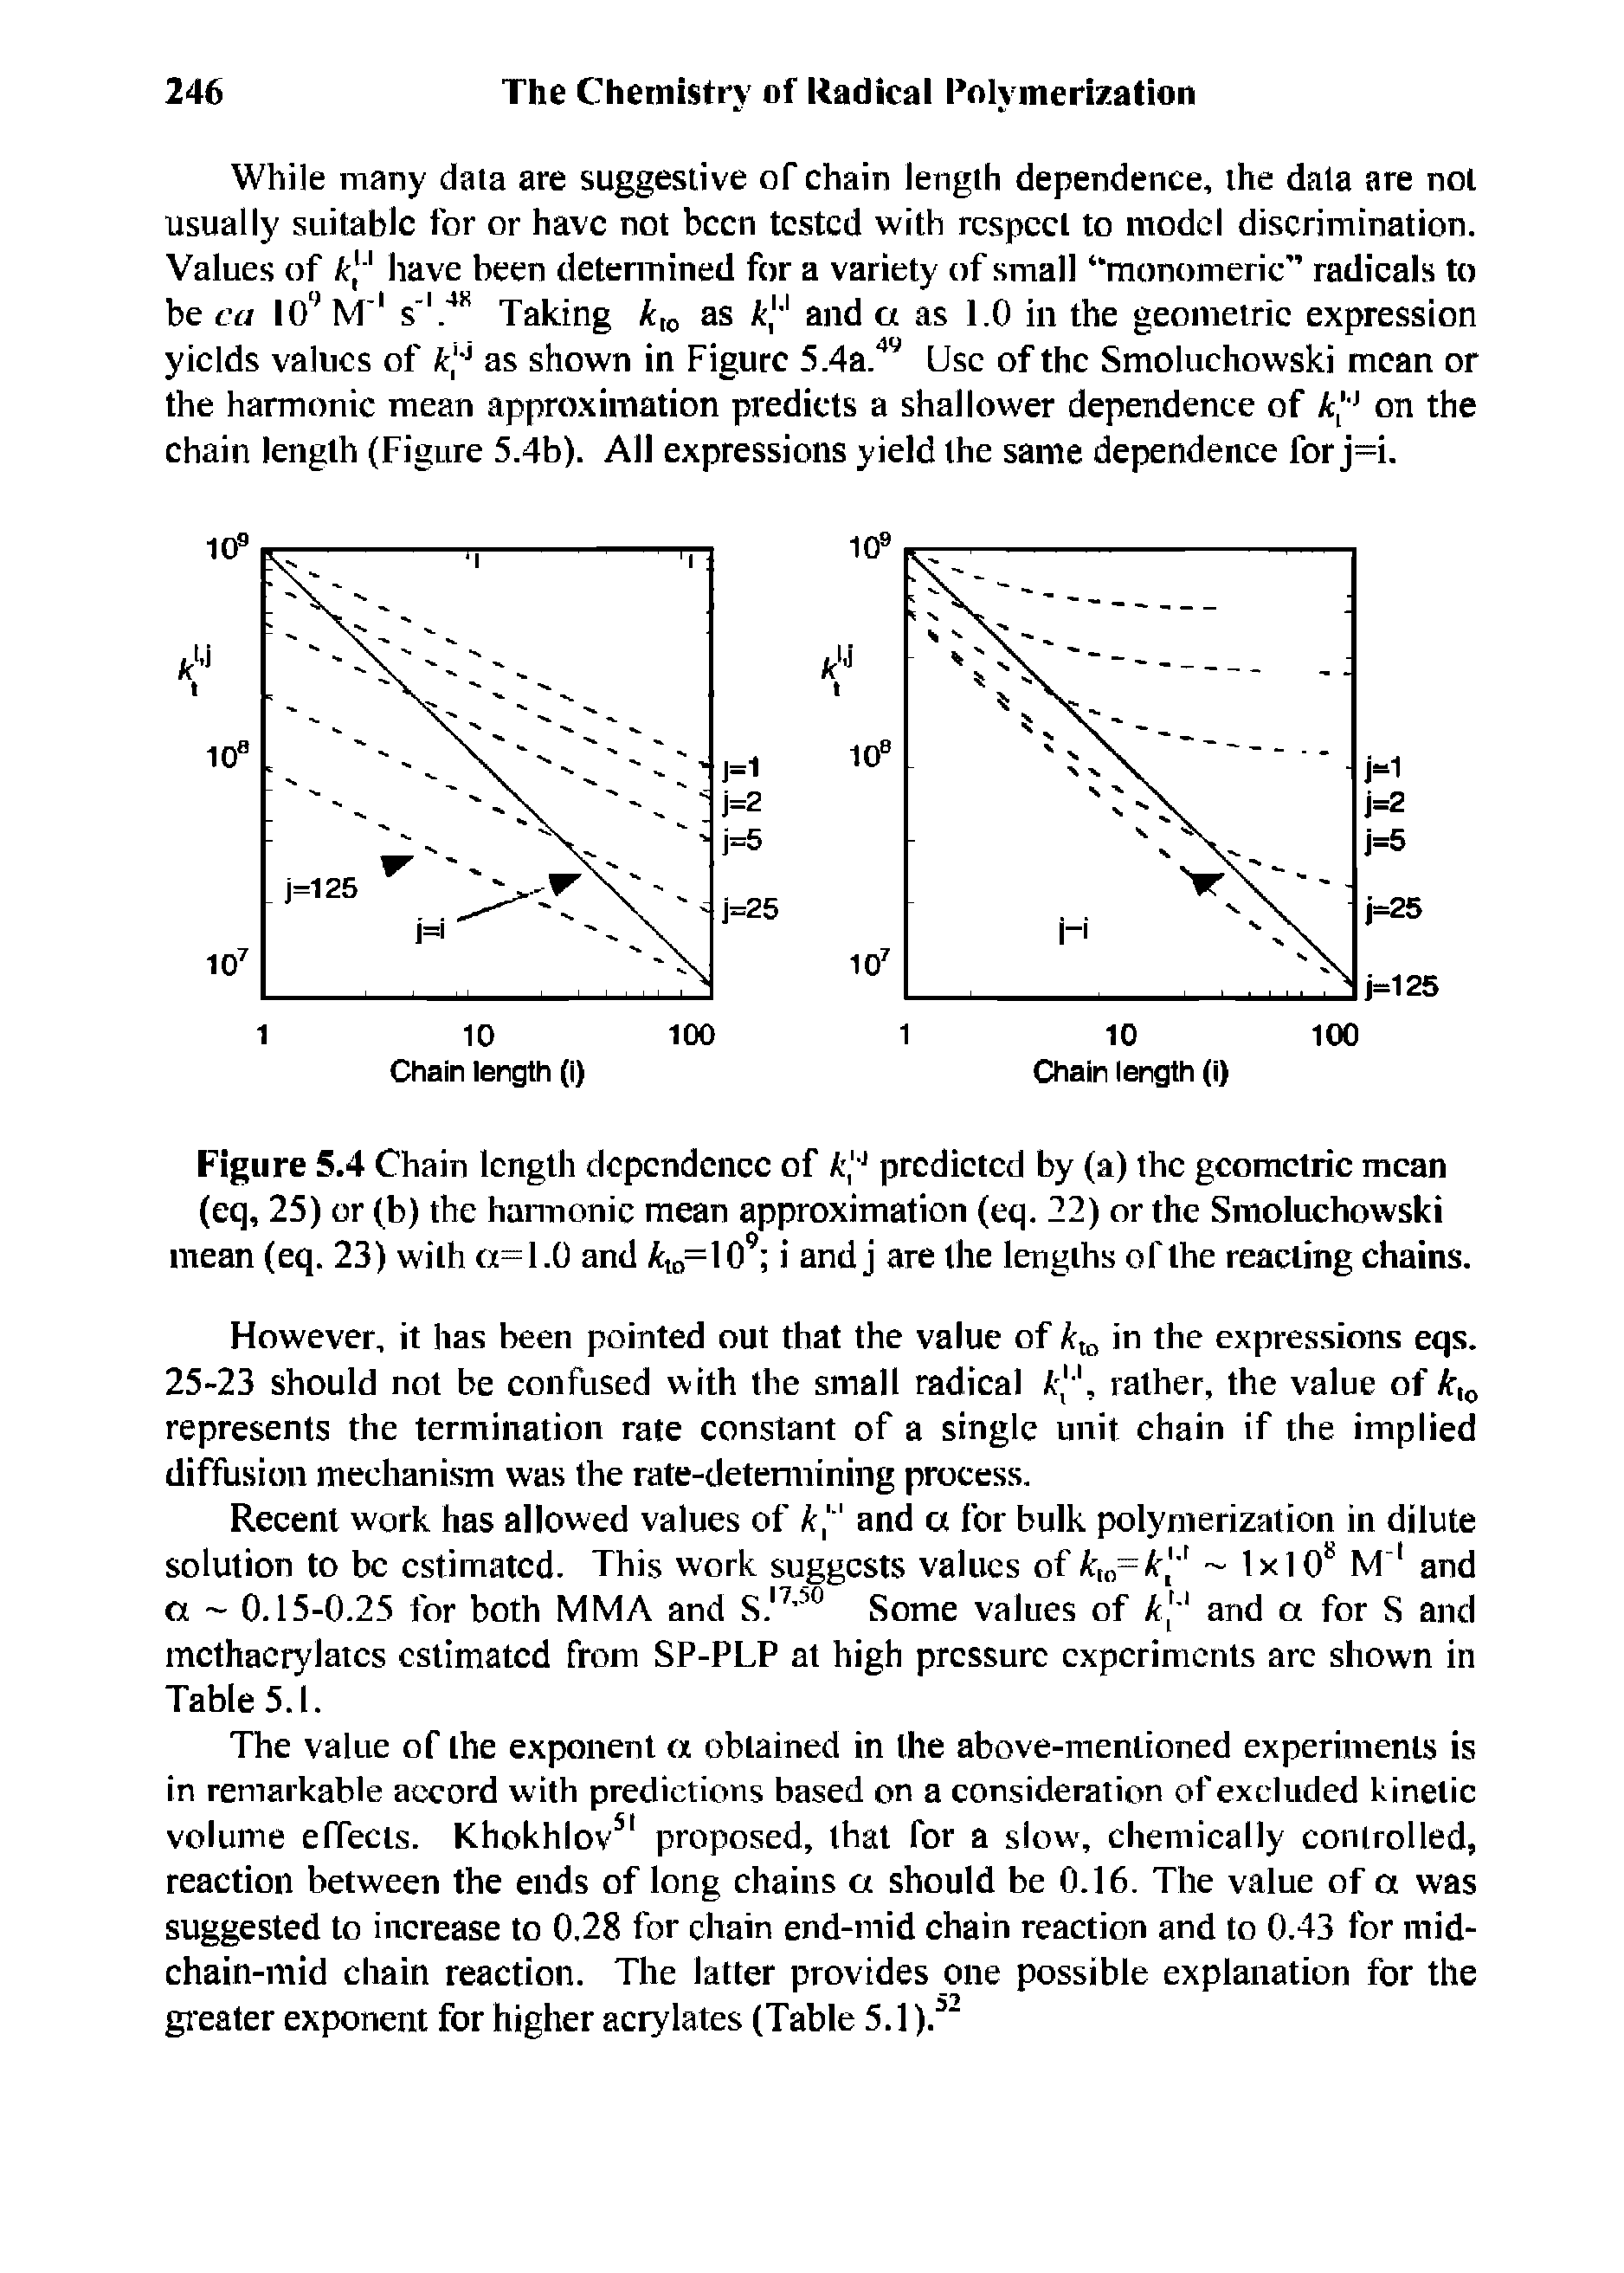 Figure 5.4 Chain length dependence of A,I J predicted by (a) the geometric mean (eq, 25) or (b) the harmonic mean approximation (eq. 22) or the Smoluchowski mean (eq. 23) with a=1.0 and to=109 i and j are the lengths of the reacting chains.